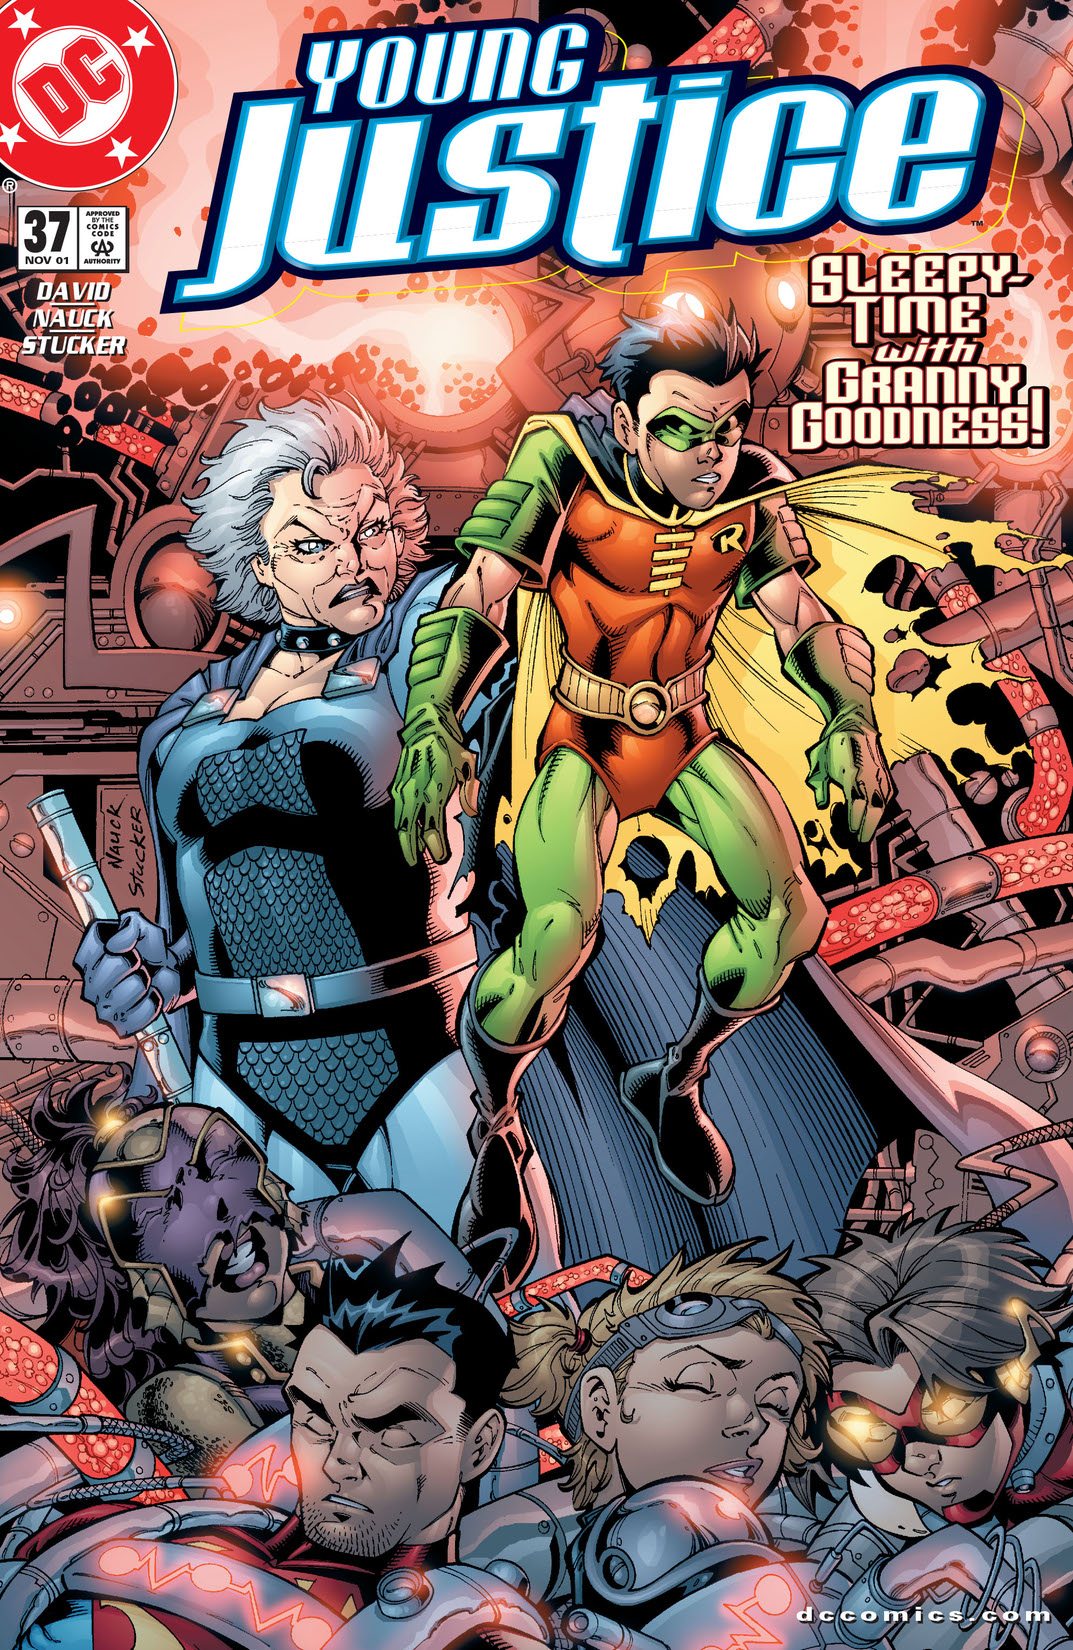 Young Justice (1998-) #37 preview images